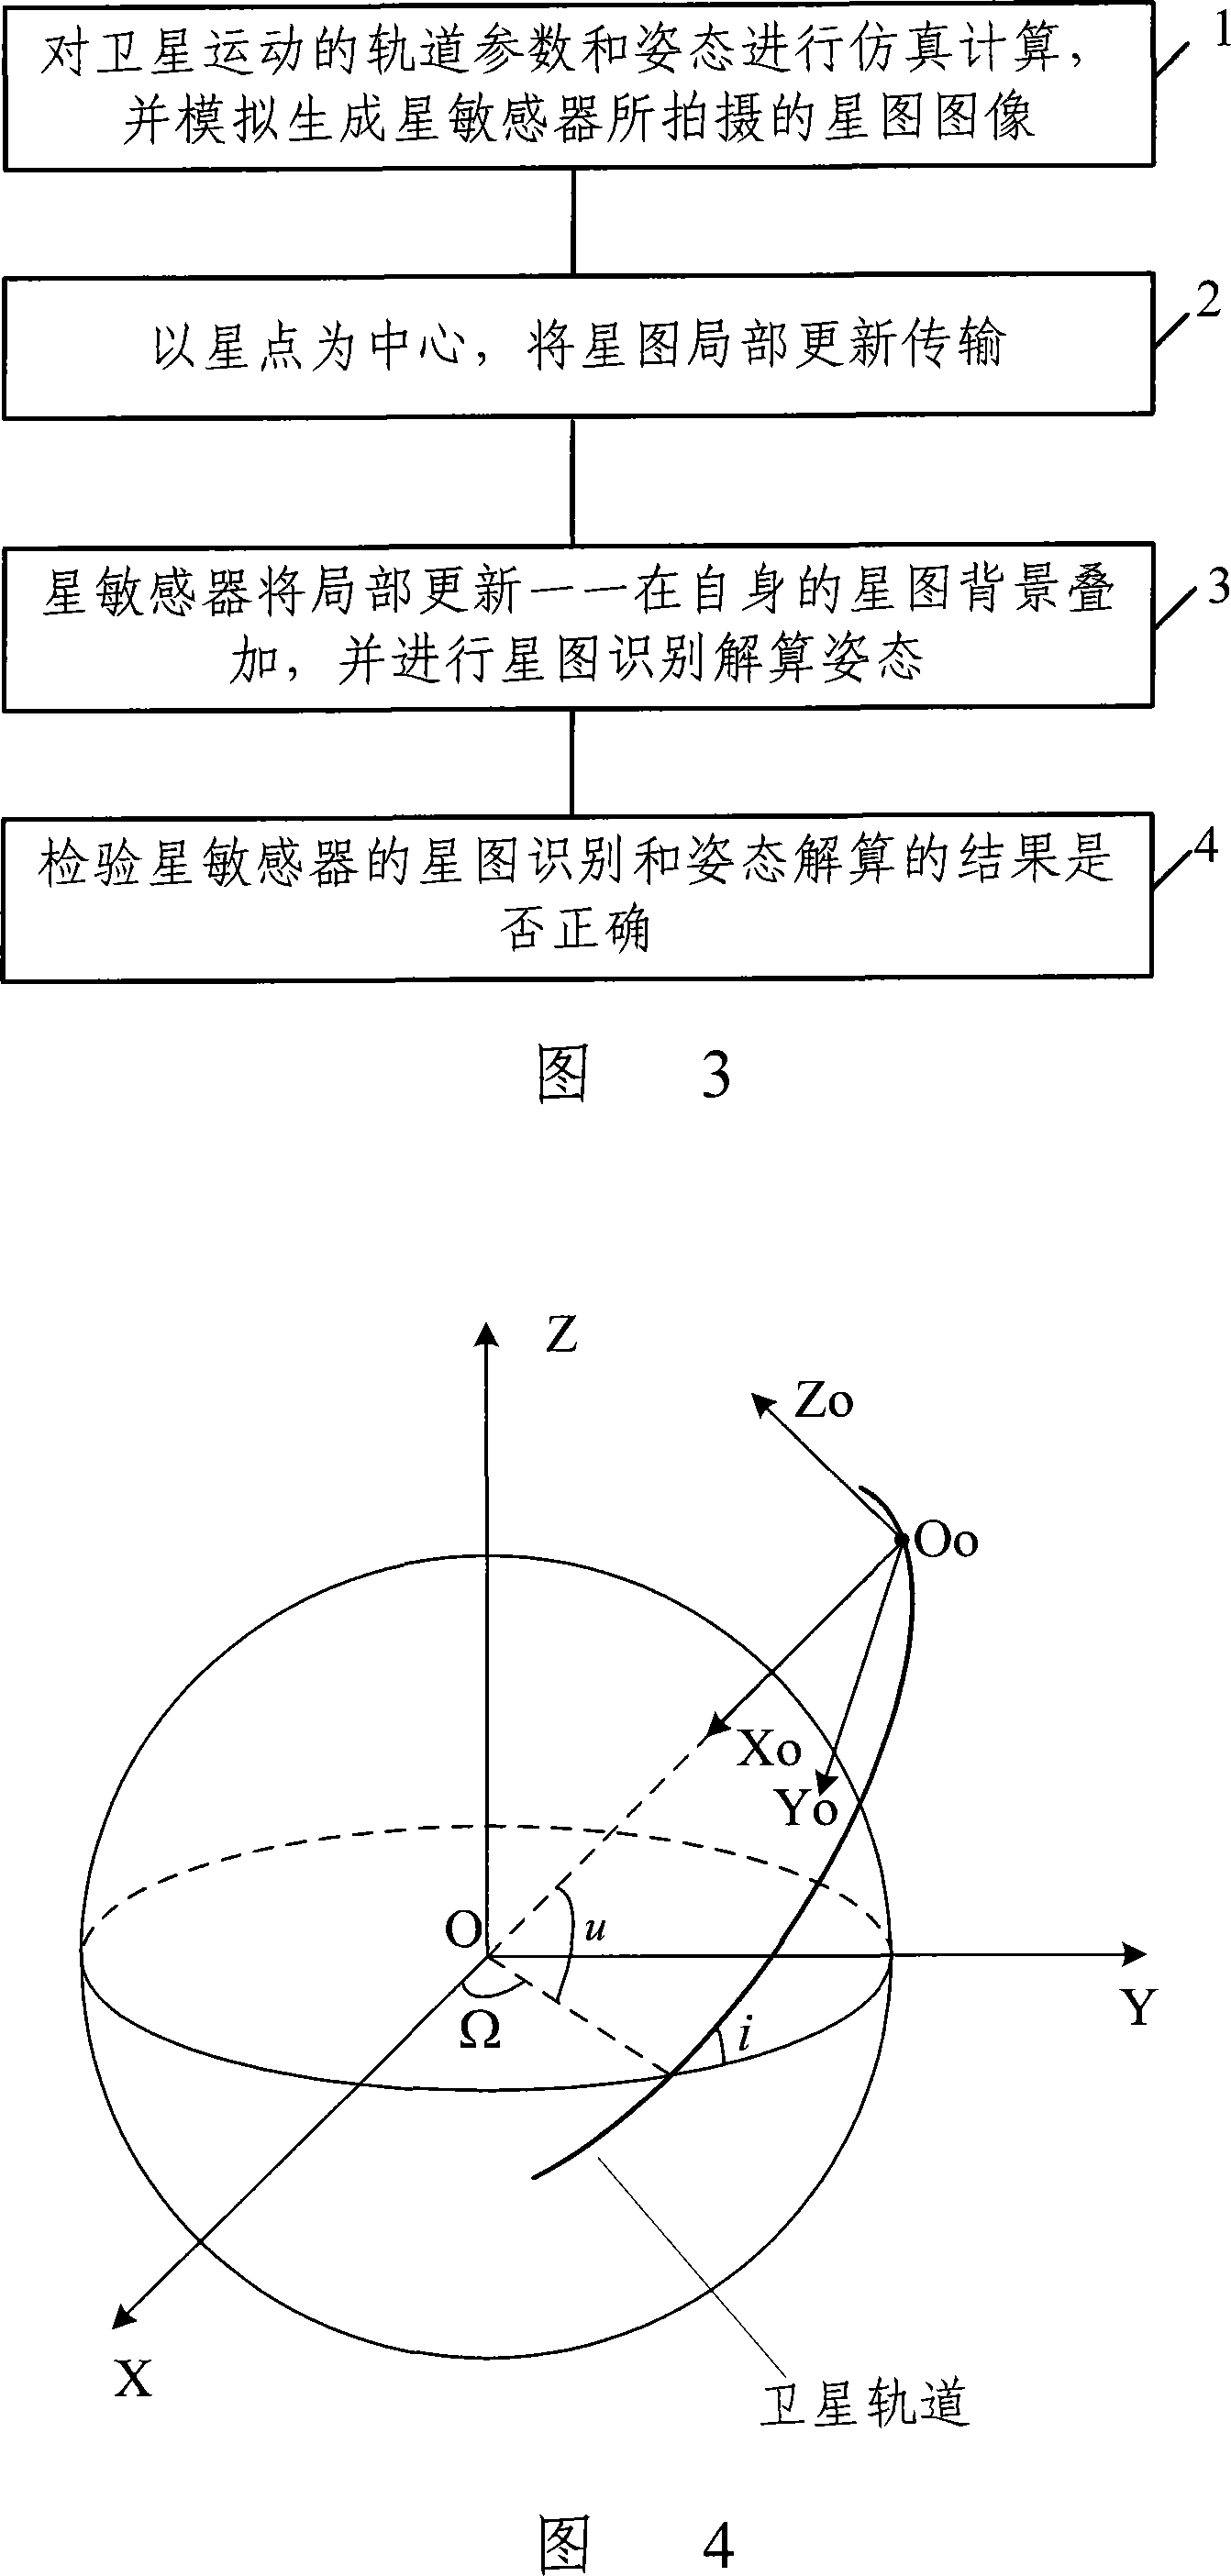 Method and apparatus for testing star sensor function based on electric injection star map